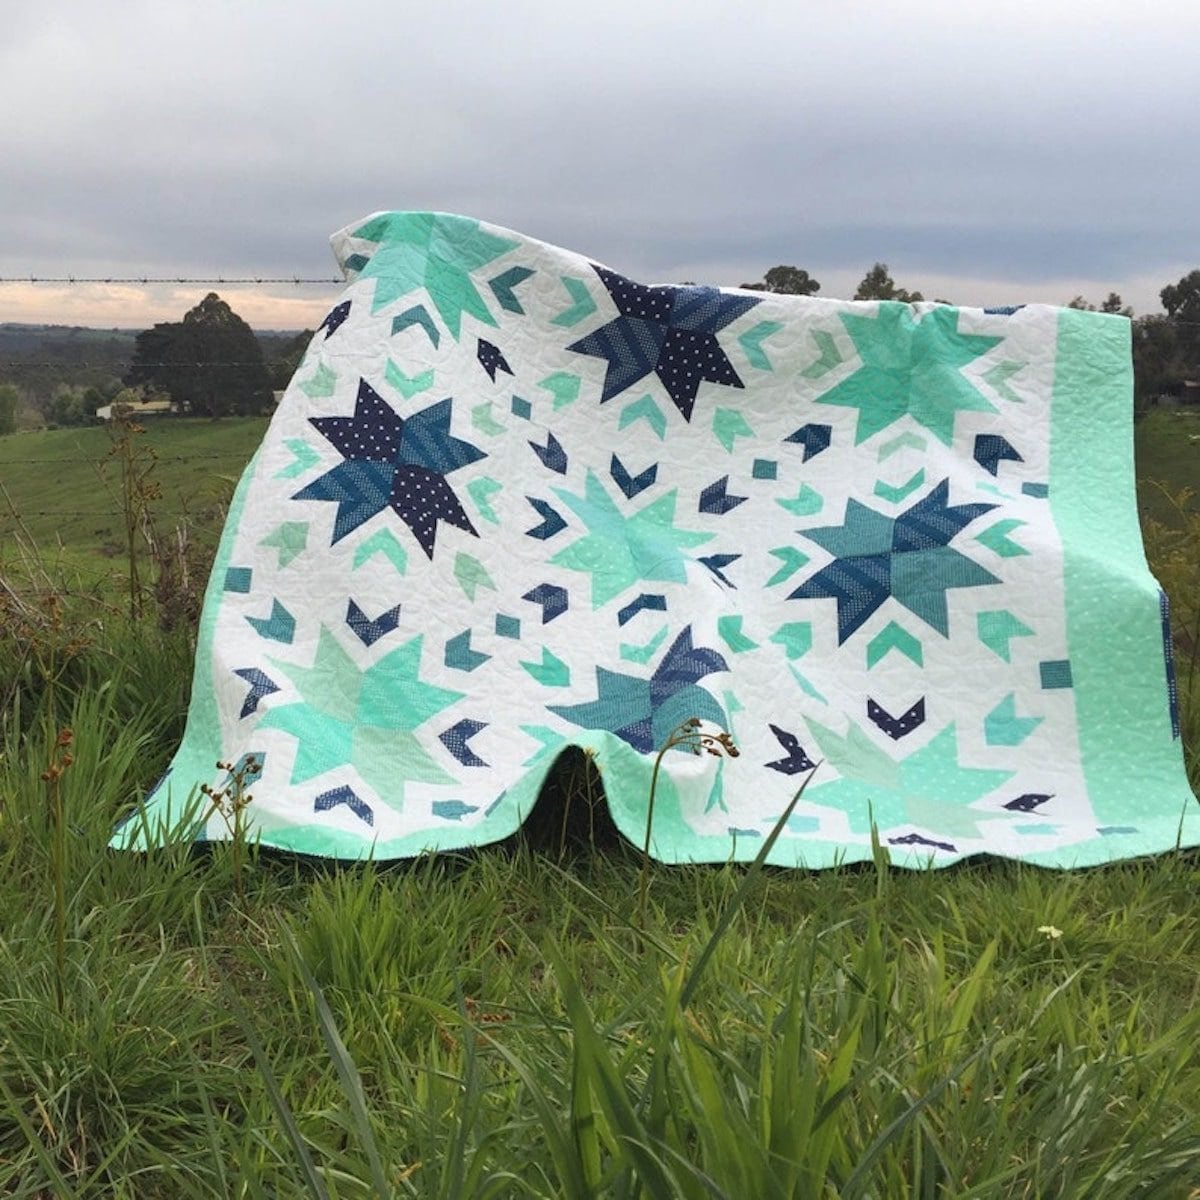 A starflower quilt pattern from Etsy